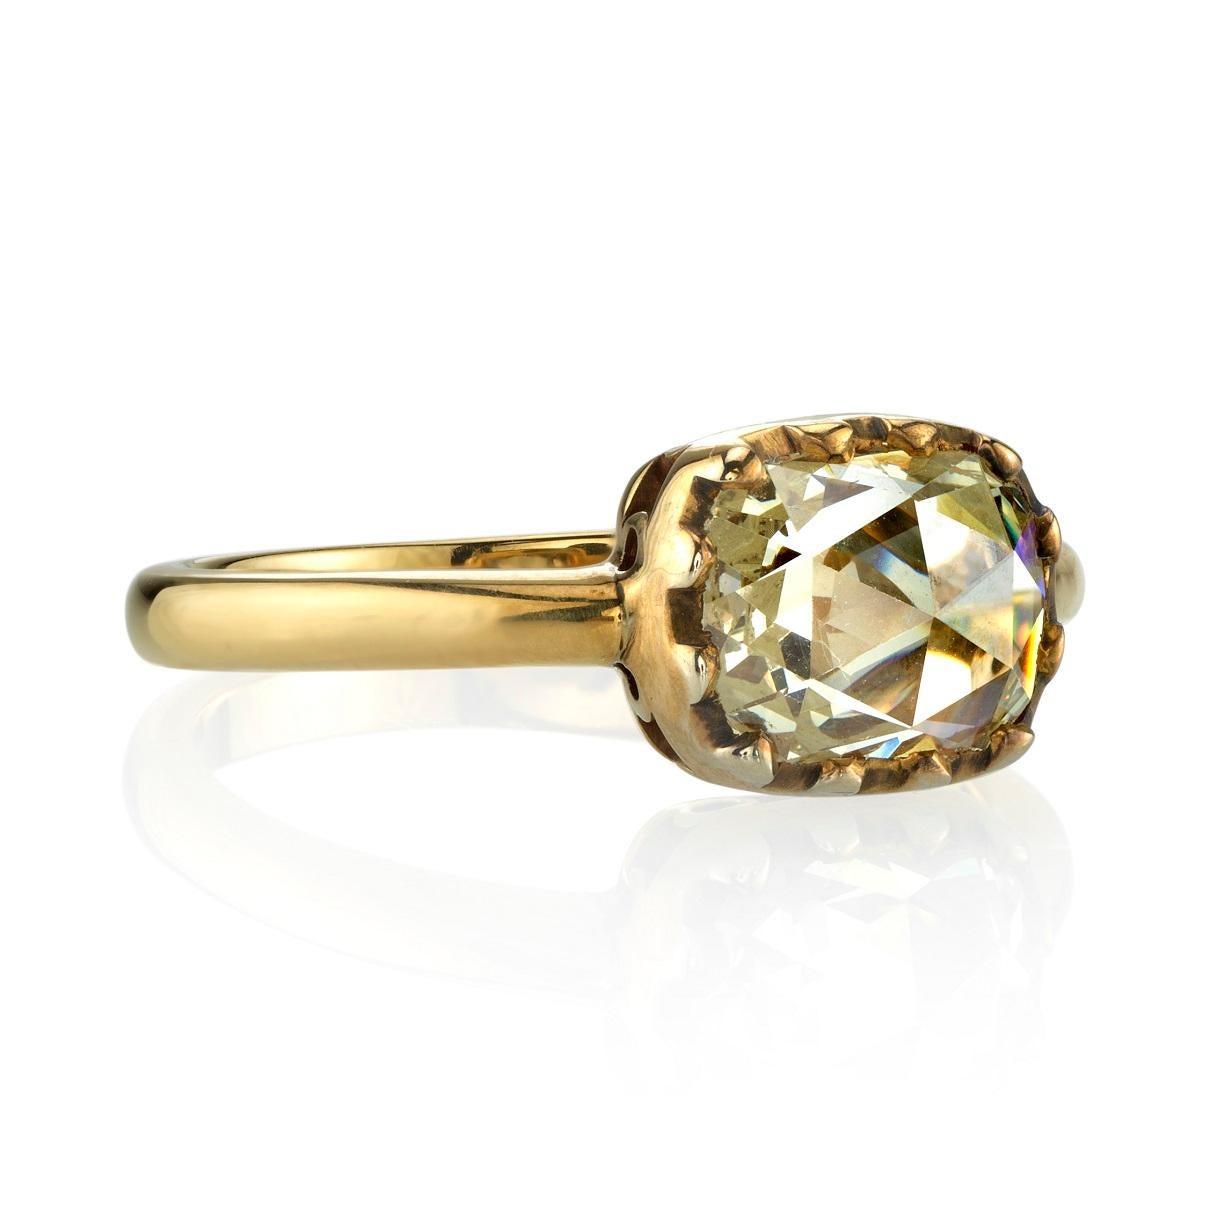 1.19ct N/SI1 EGL certified cushion Rose cut diamond set in an 18k yellow gold and white mounting. Ring is currently a size 6 and can be sized to fit. 